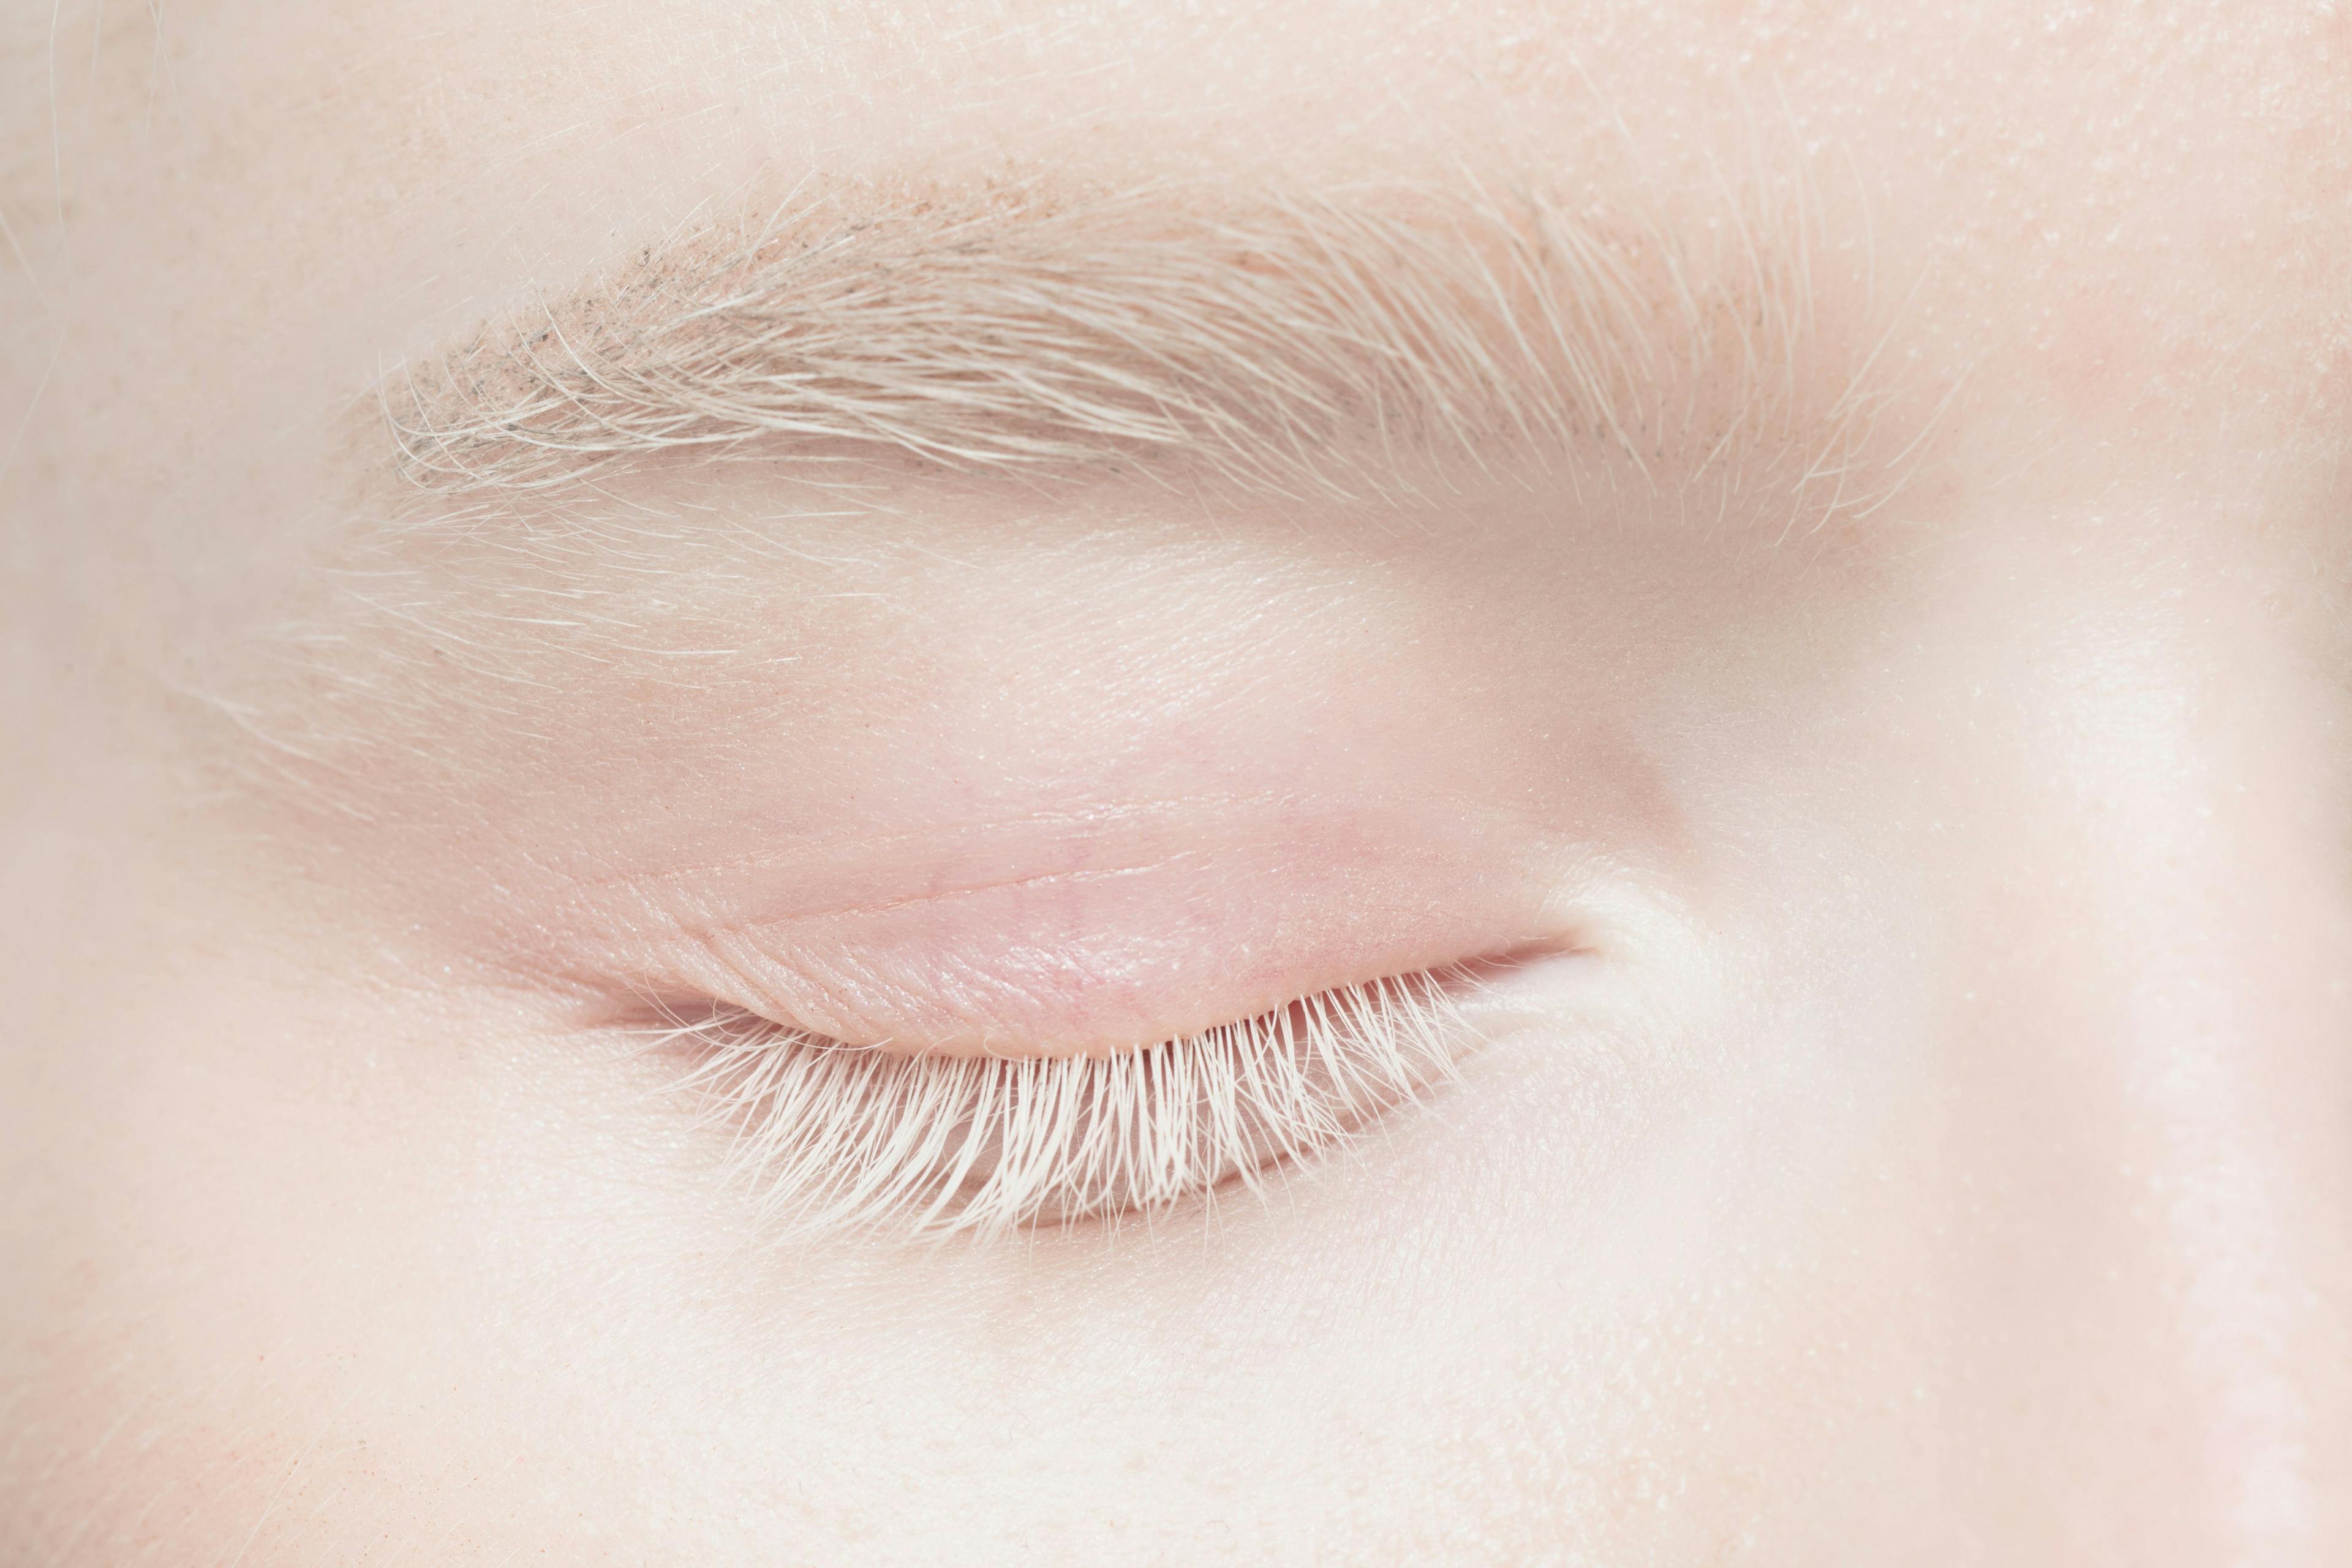 Close up view of eye and eyebrow of person with albinism